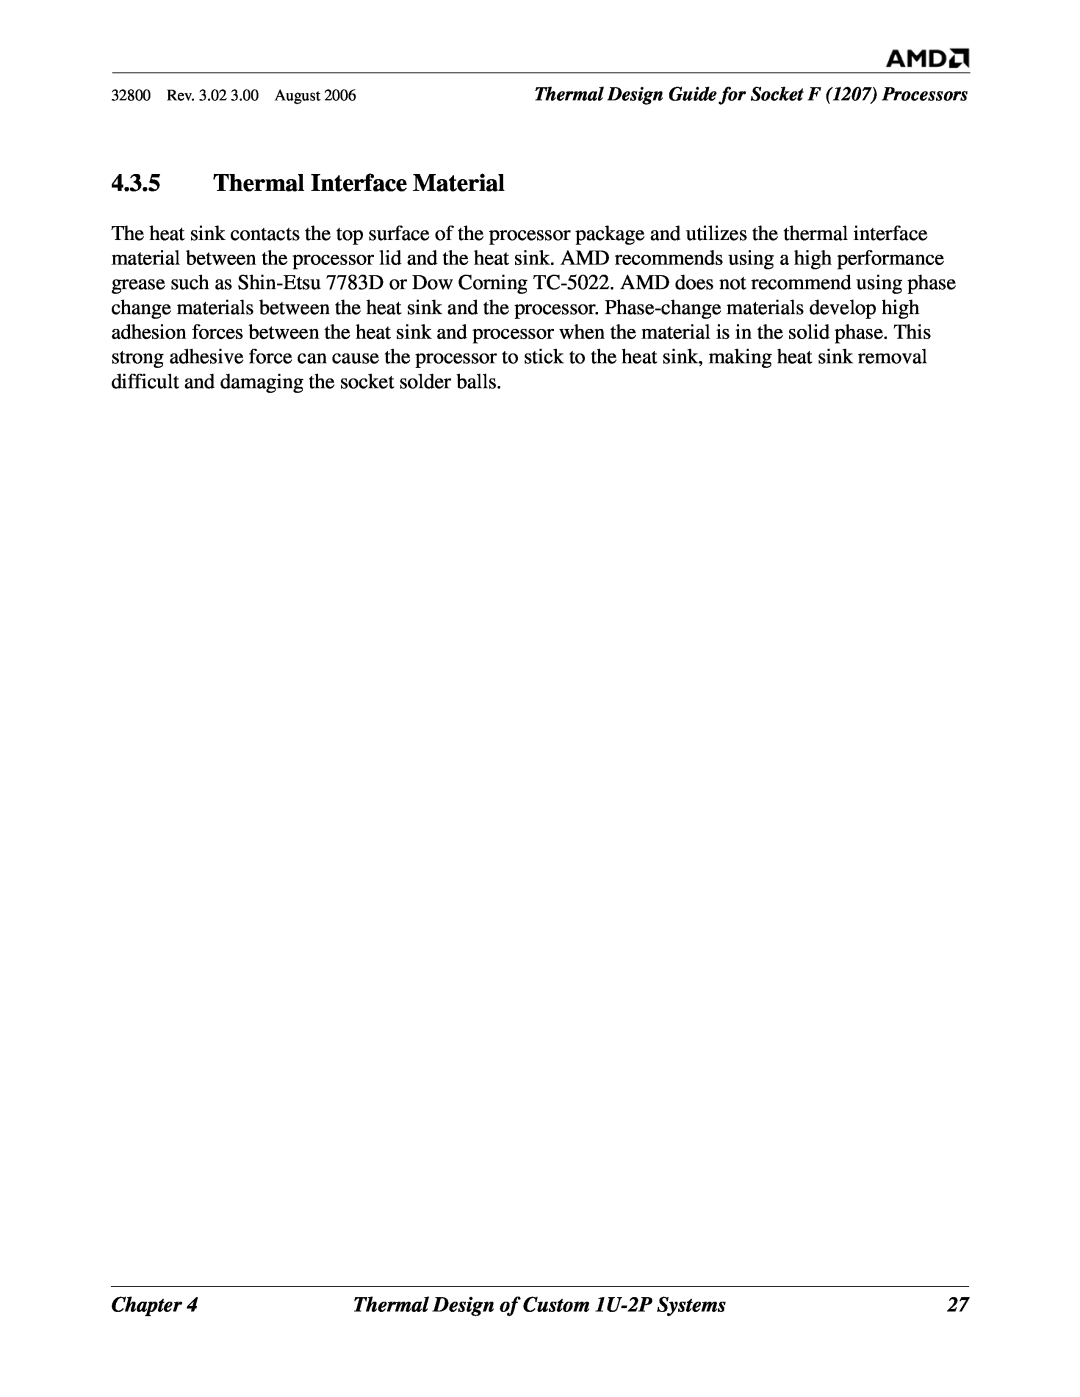 AMD 1207 manual Thermal Interface Material, Chapter, Thermal Design of Custom 1U-2P Systems 